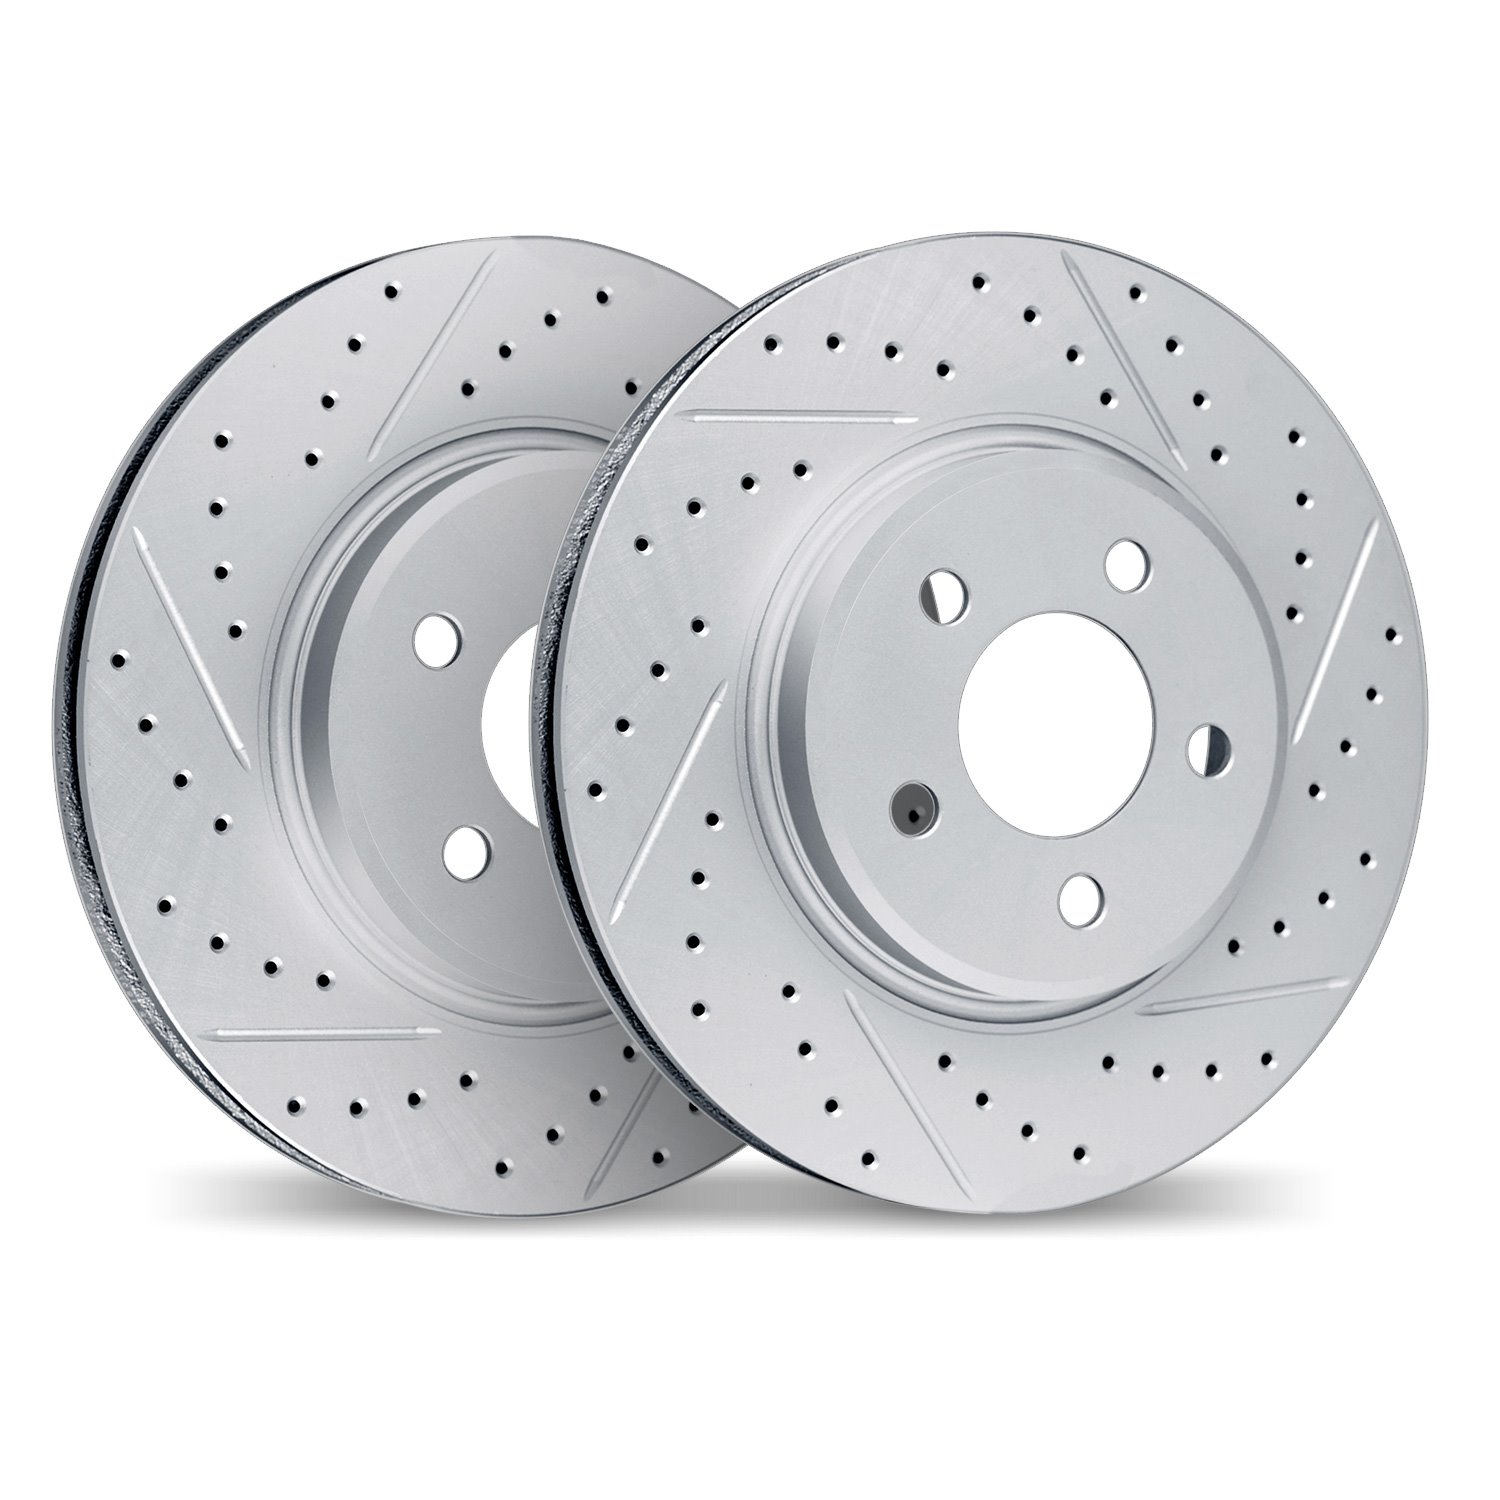 2002-31100 Geoperformance Drilled/Slotted Brake Rotors, 2009-2016 BMW, Position: Rear